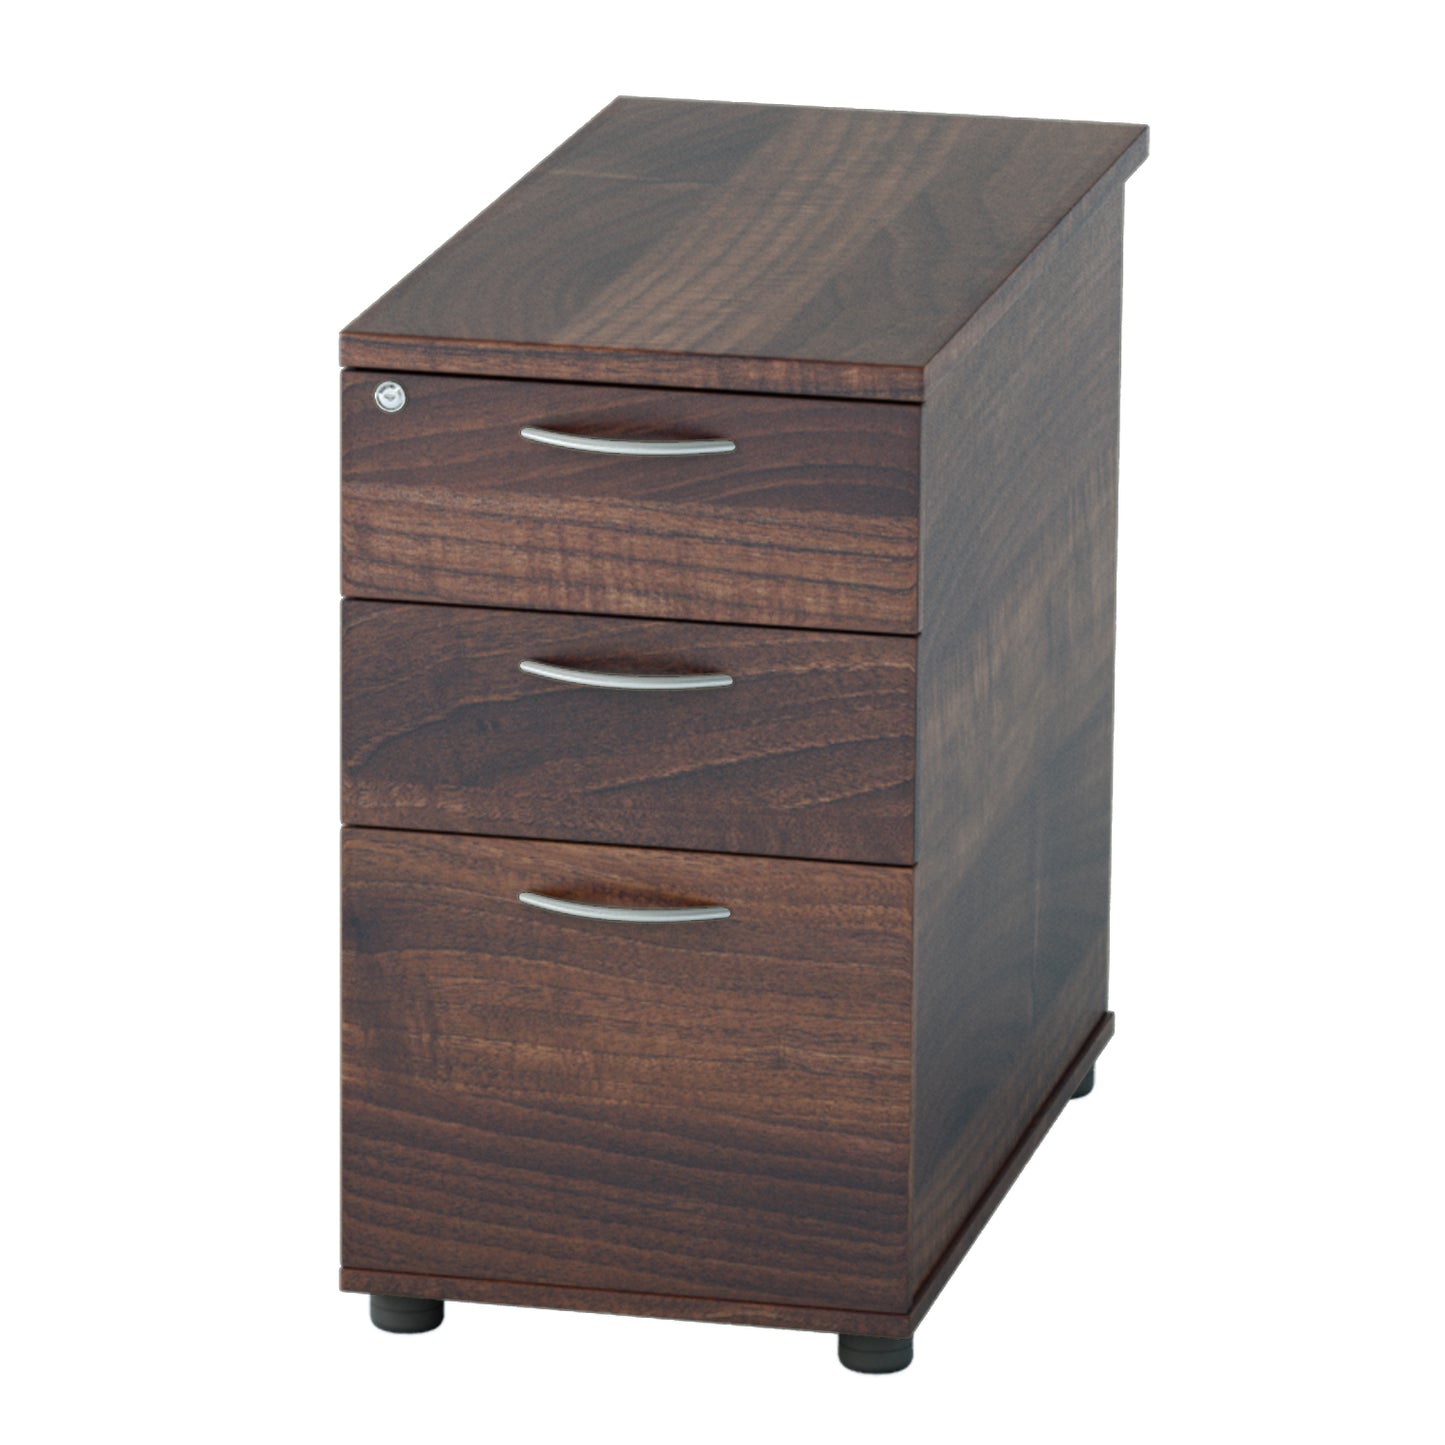 Satellite Pedestal 3 or 4 drawer desk high (available in 2 sizes)